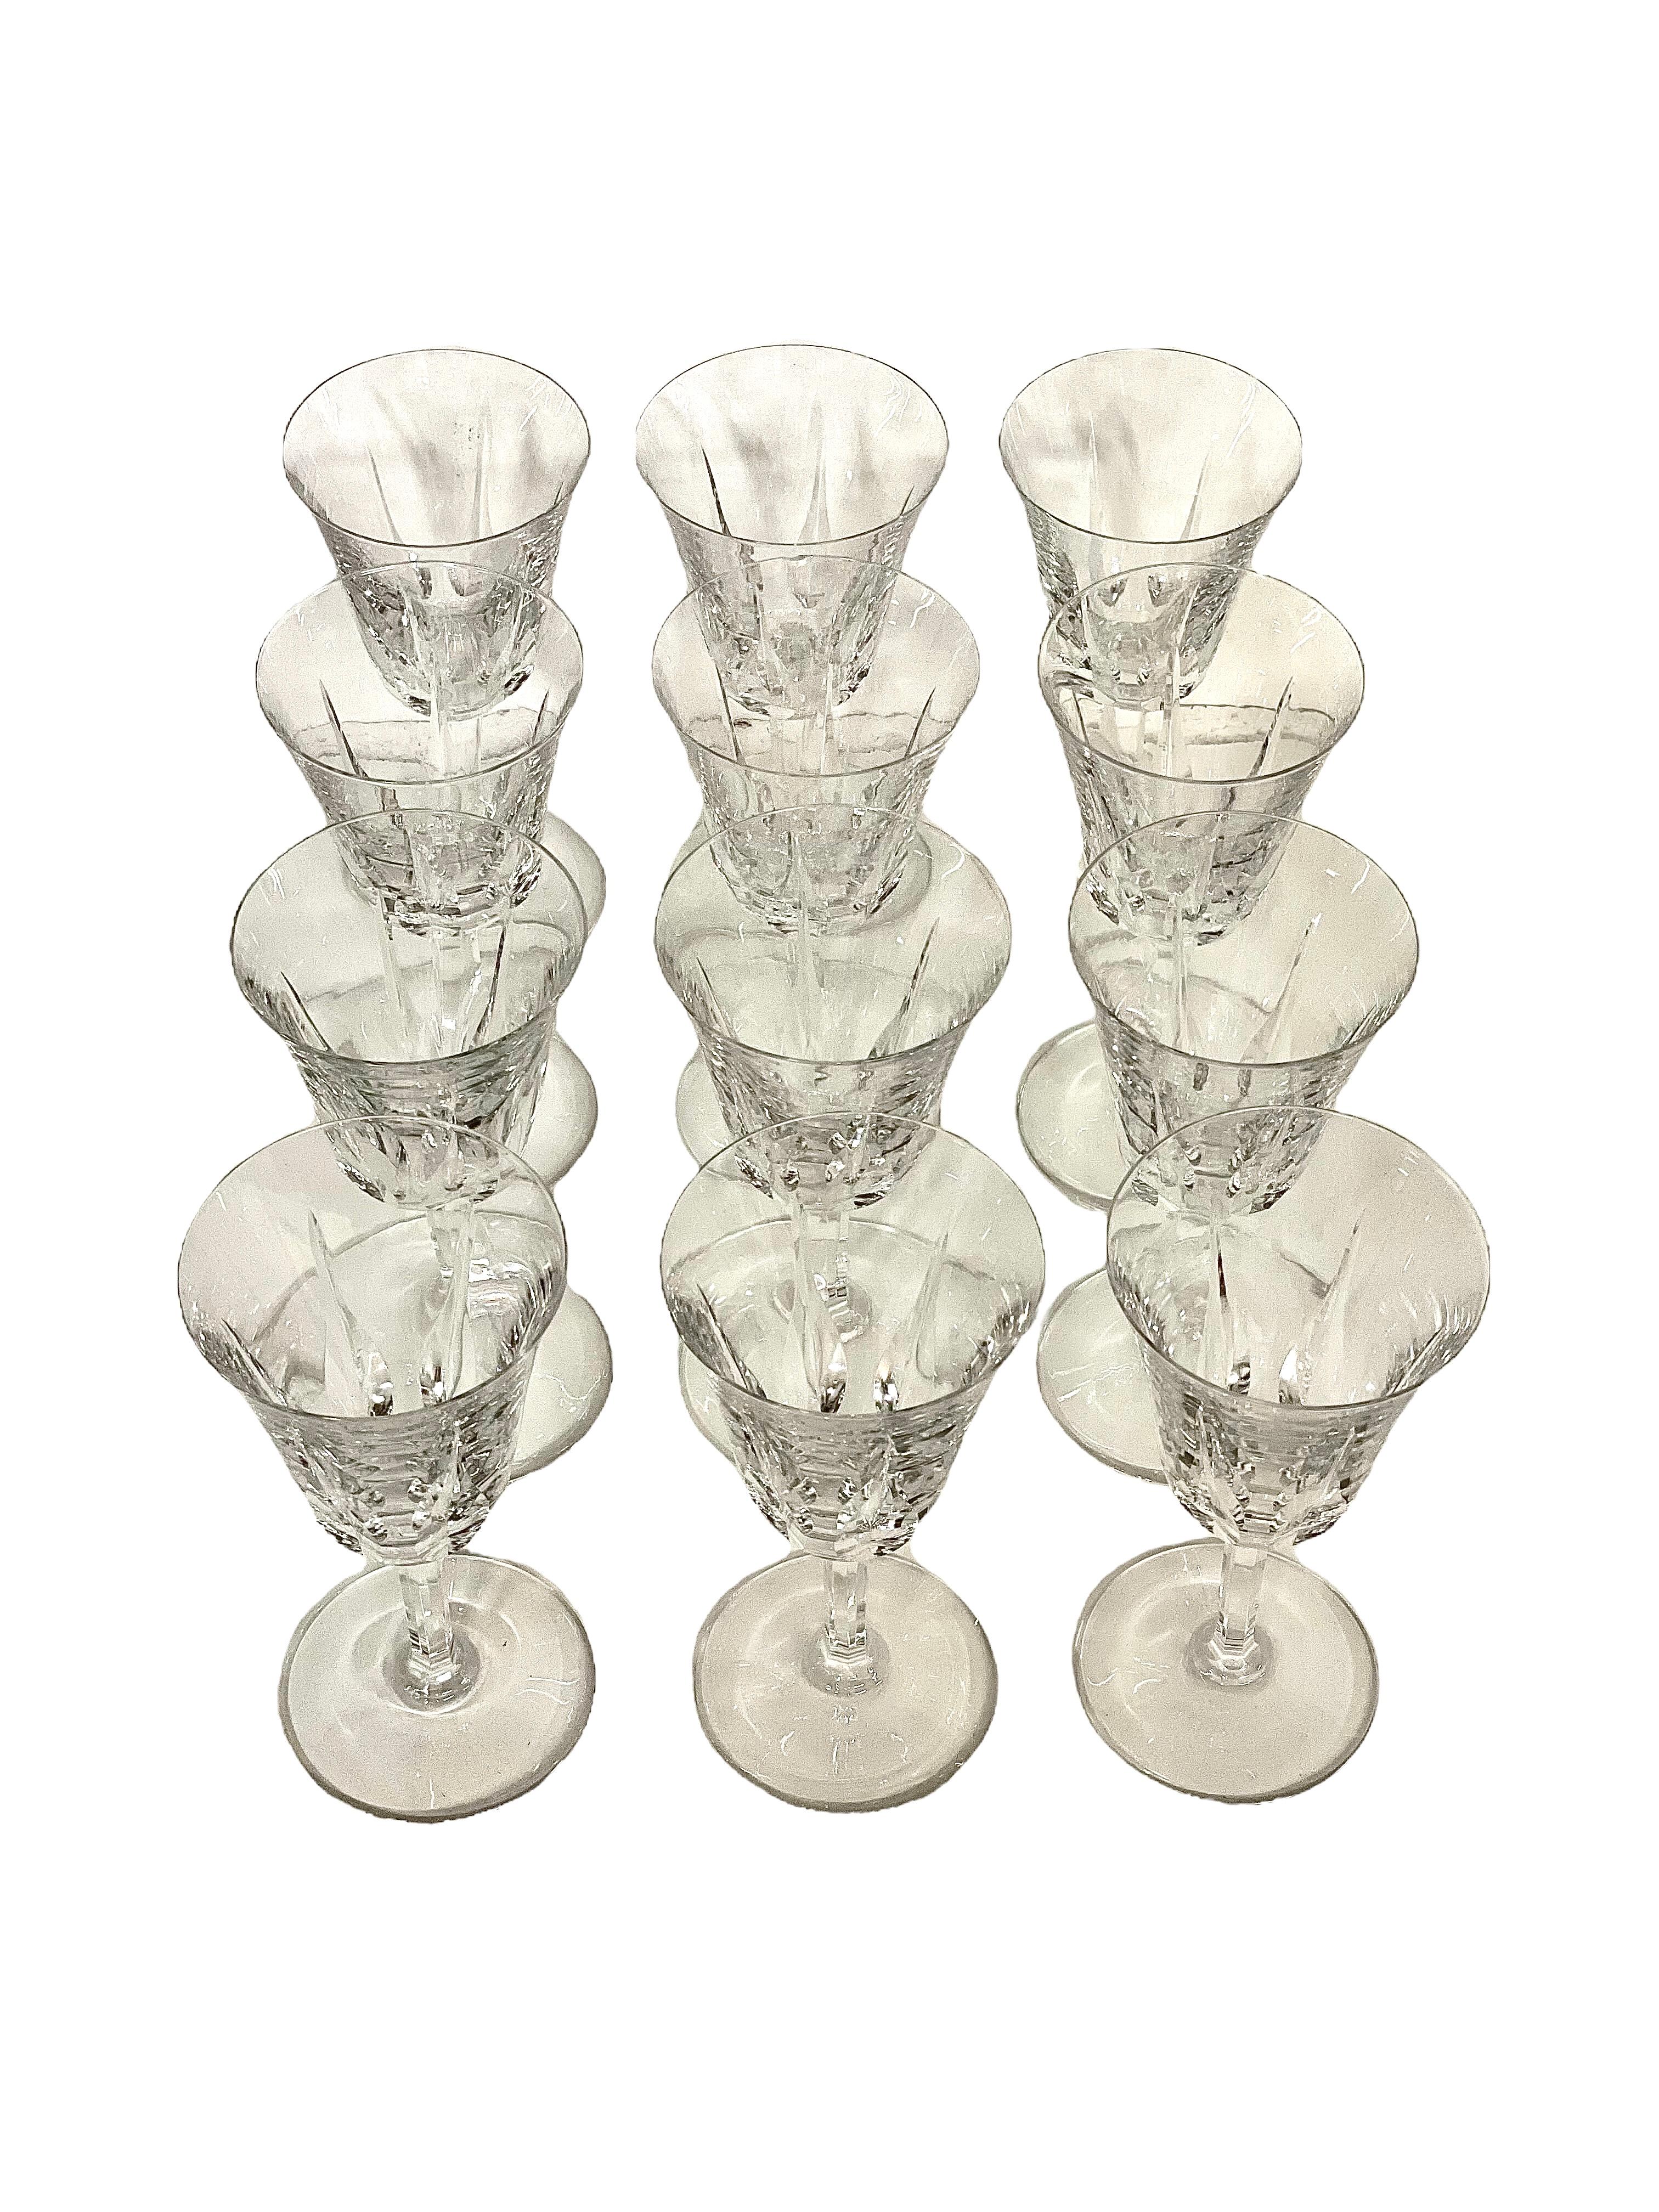 An exceptional set of 12 crystal water glasses in sparkling Saint-Louis crystal. The tulip-shaped chalice of each is cut with tall and pointed lozenges, while the stem features elegantly cut flat ribs. The glasses are all stamped 'Saint-Louis' under